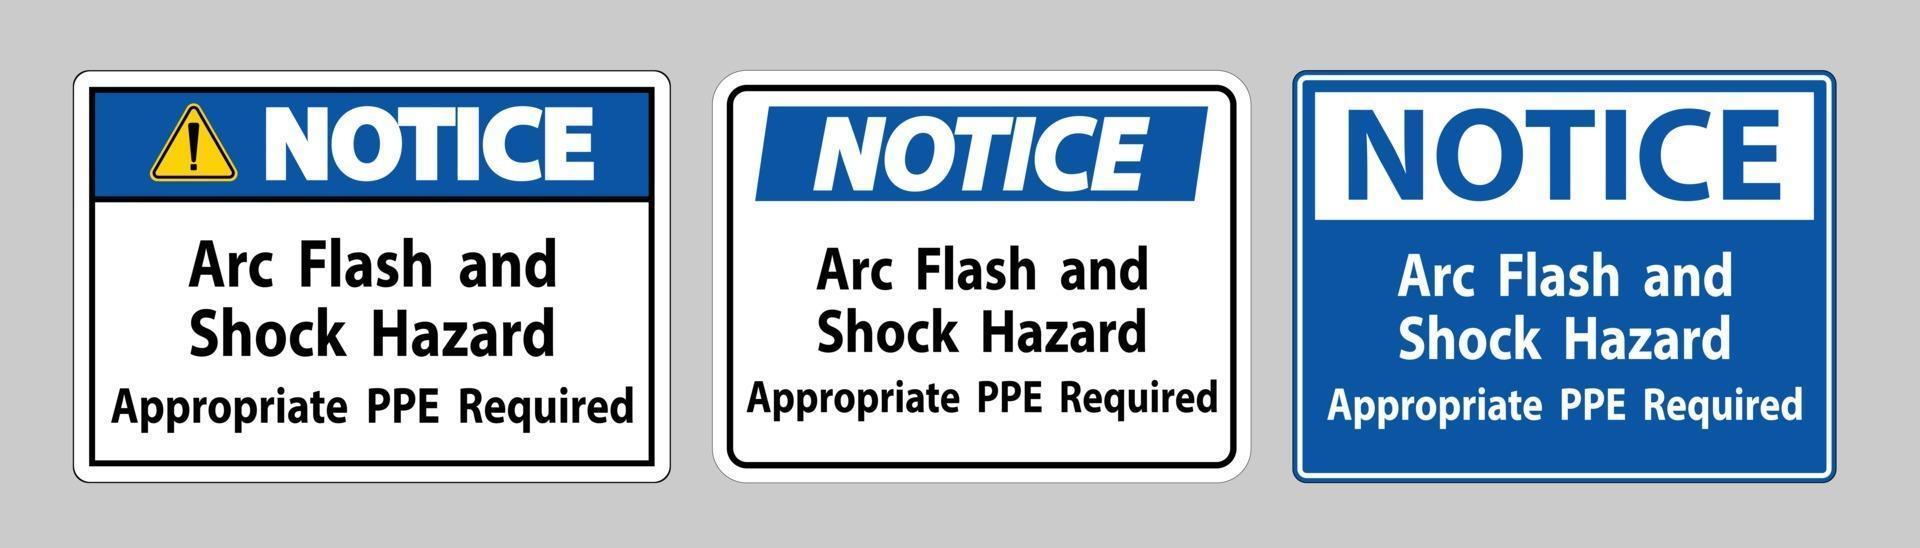 Notice Sign Arc Flash And Shock Hazard Appropriate PPE Required vector